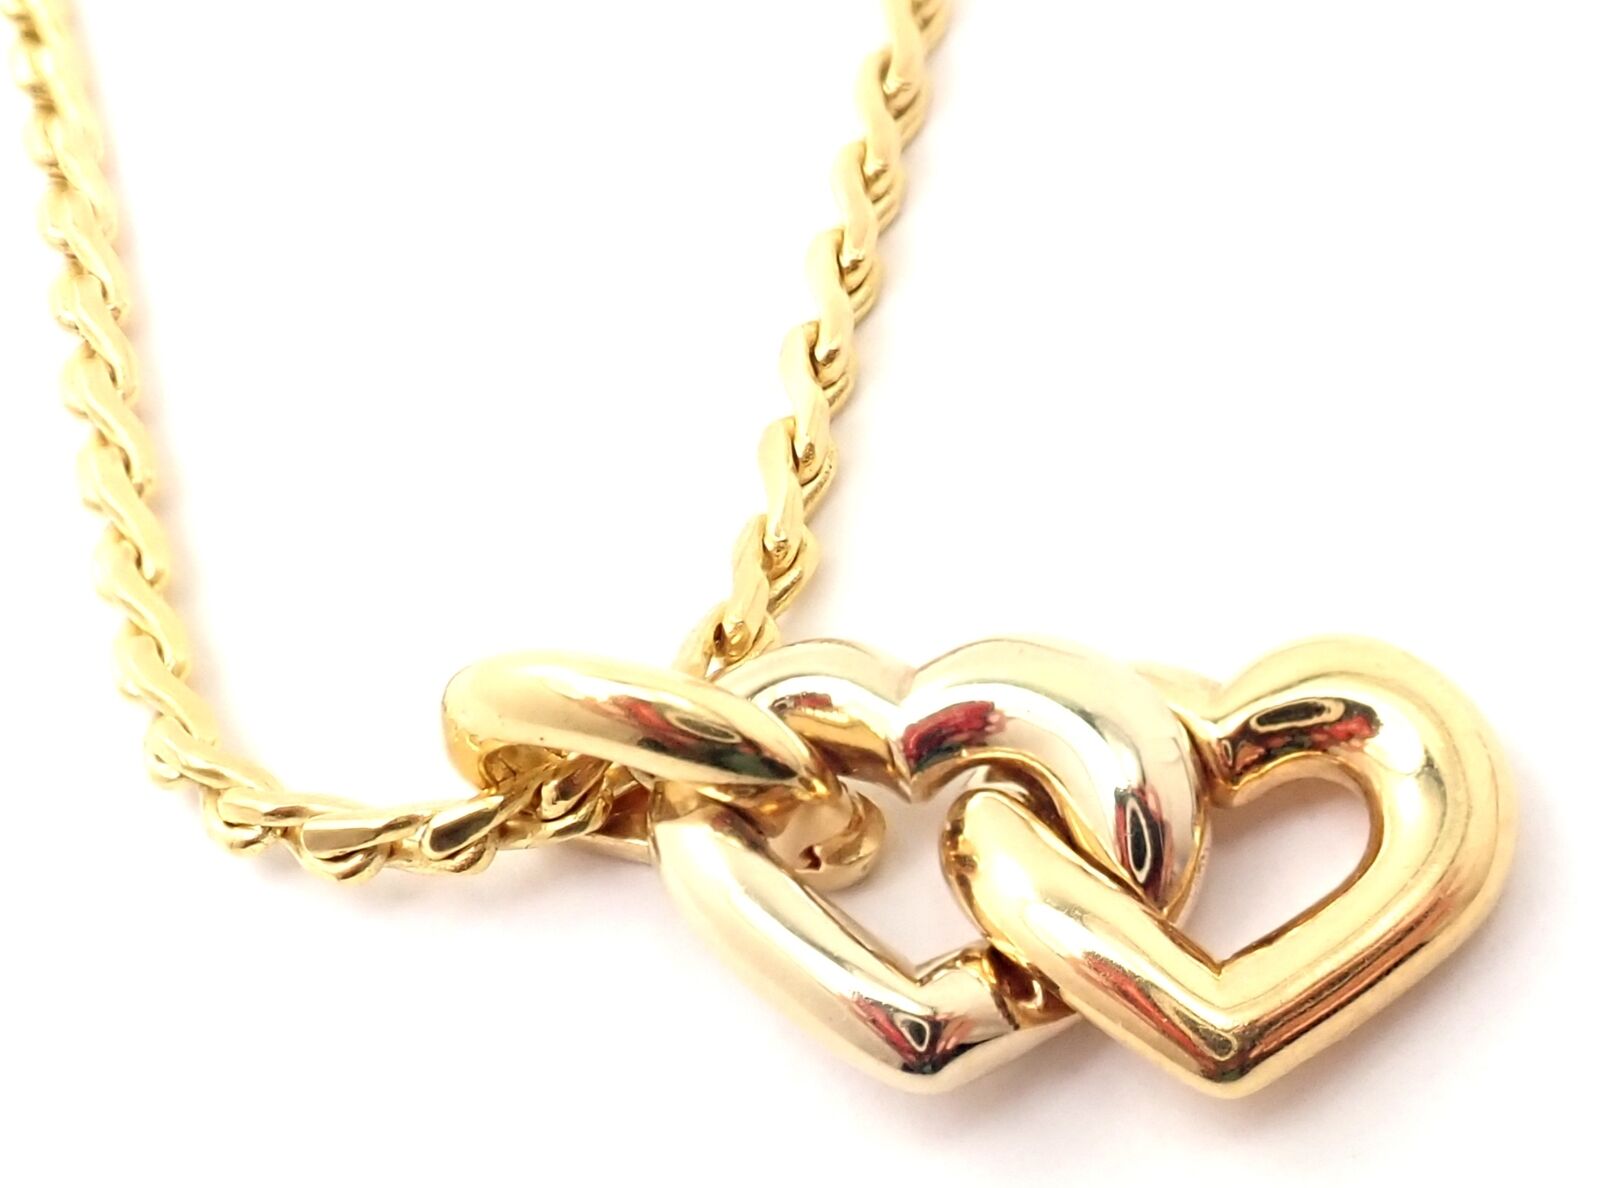 FWRD Renew Louis Vuitton Necklace in Gold